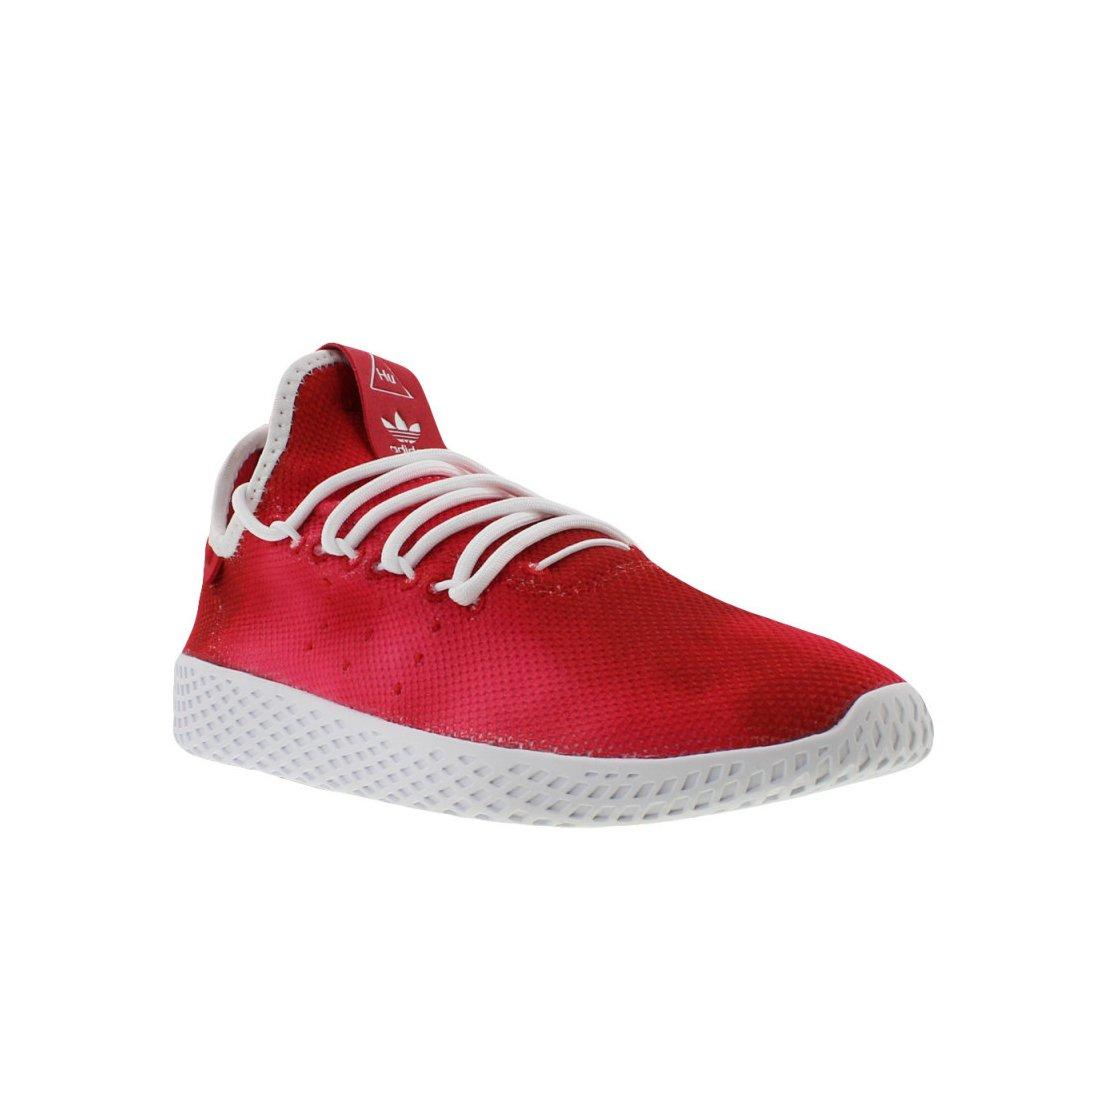 adidas pharrell williams red shoes